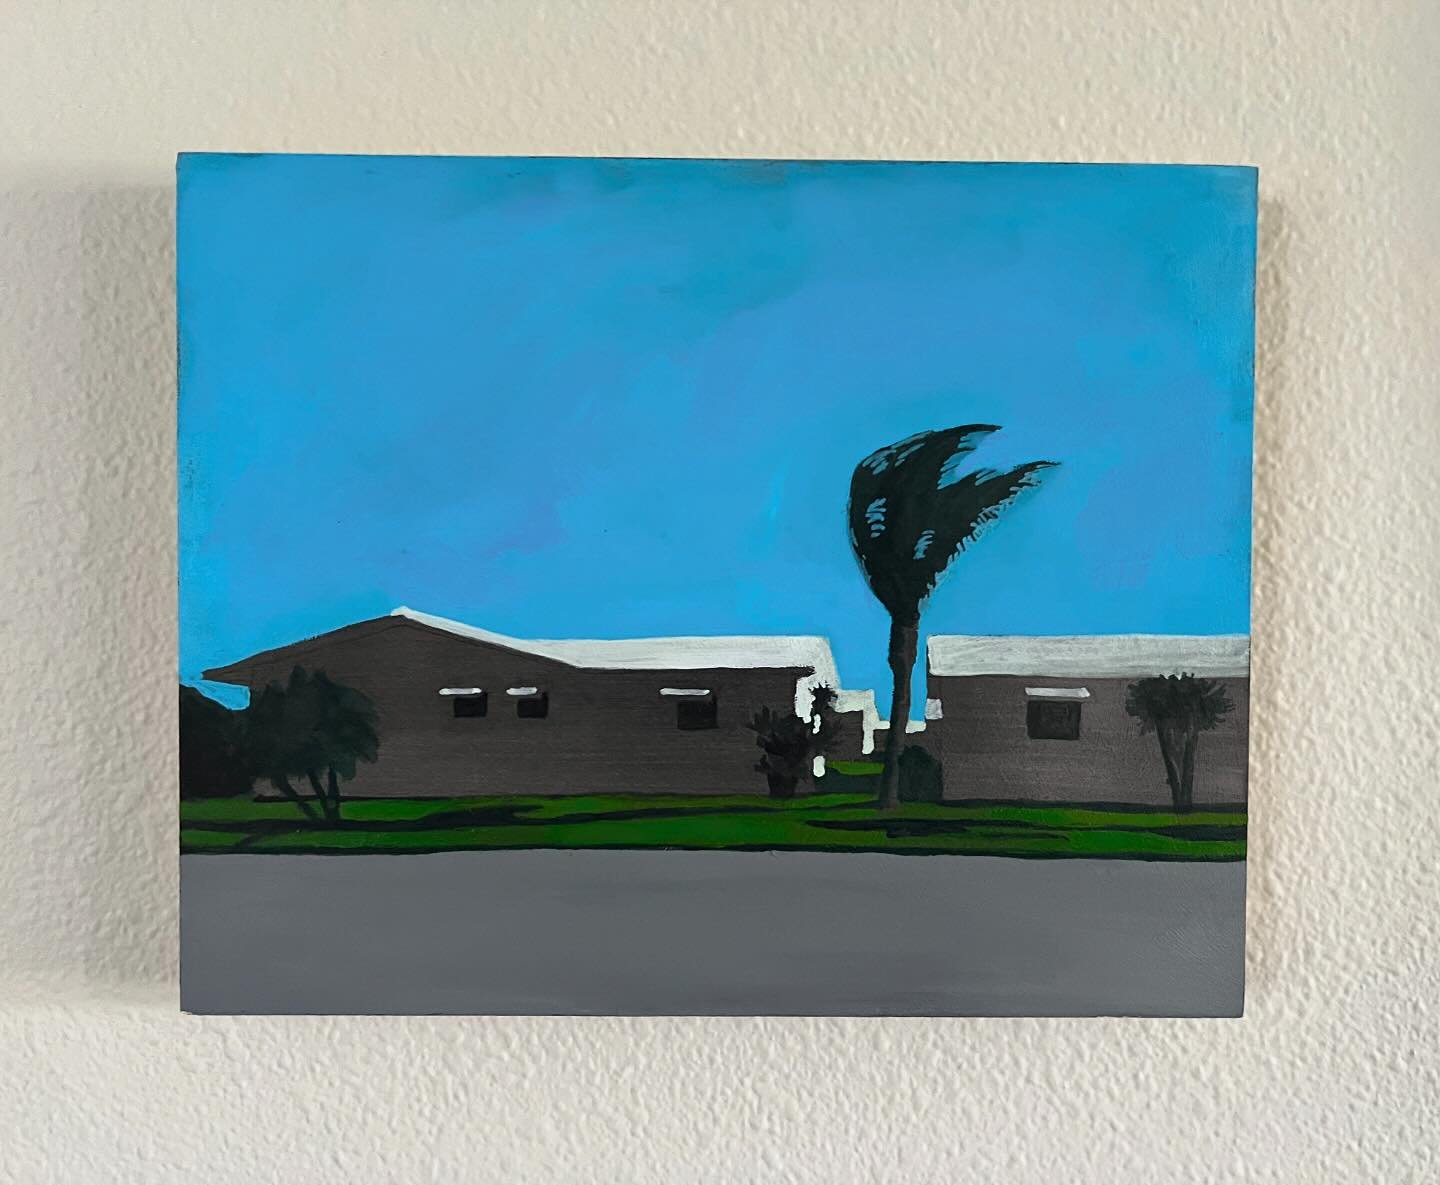 Another oldie, 2015? A swirly day in Leisureville 🌬️ 10x8 acrylic on panel (Sold) #southflorida #orlandoartist